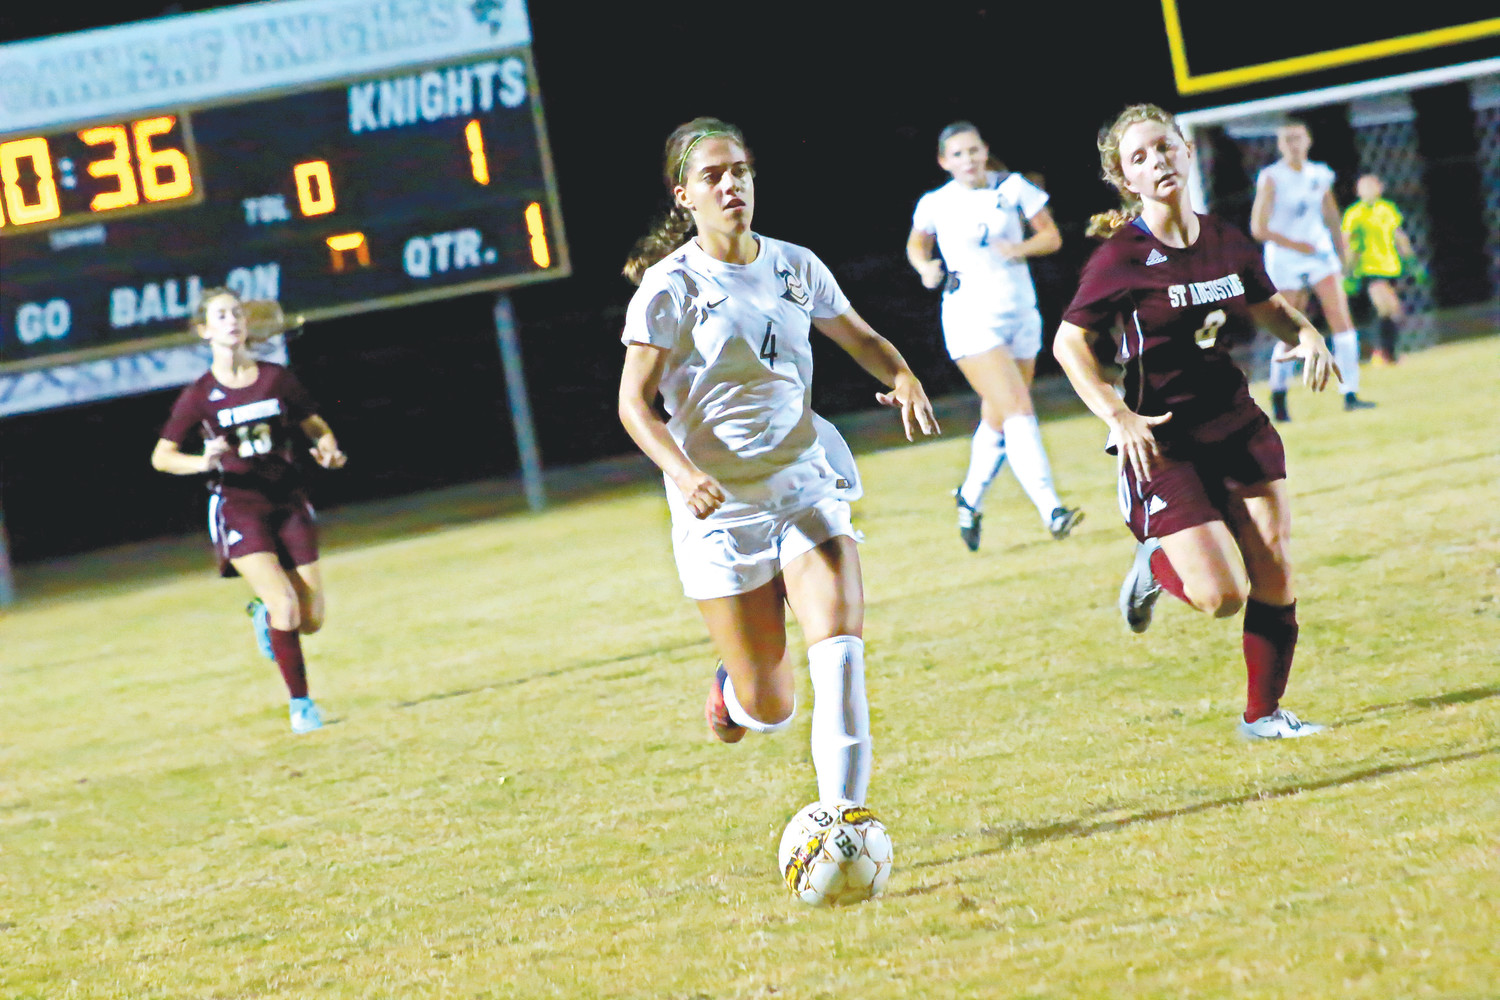 Oakleaf High soccer forward Michelle “K-Smash-Ski” Kanaski flies downfield en route to one of her three goals for Lady Knights in 9-1 season opening district win over St. Augustine.